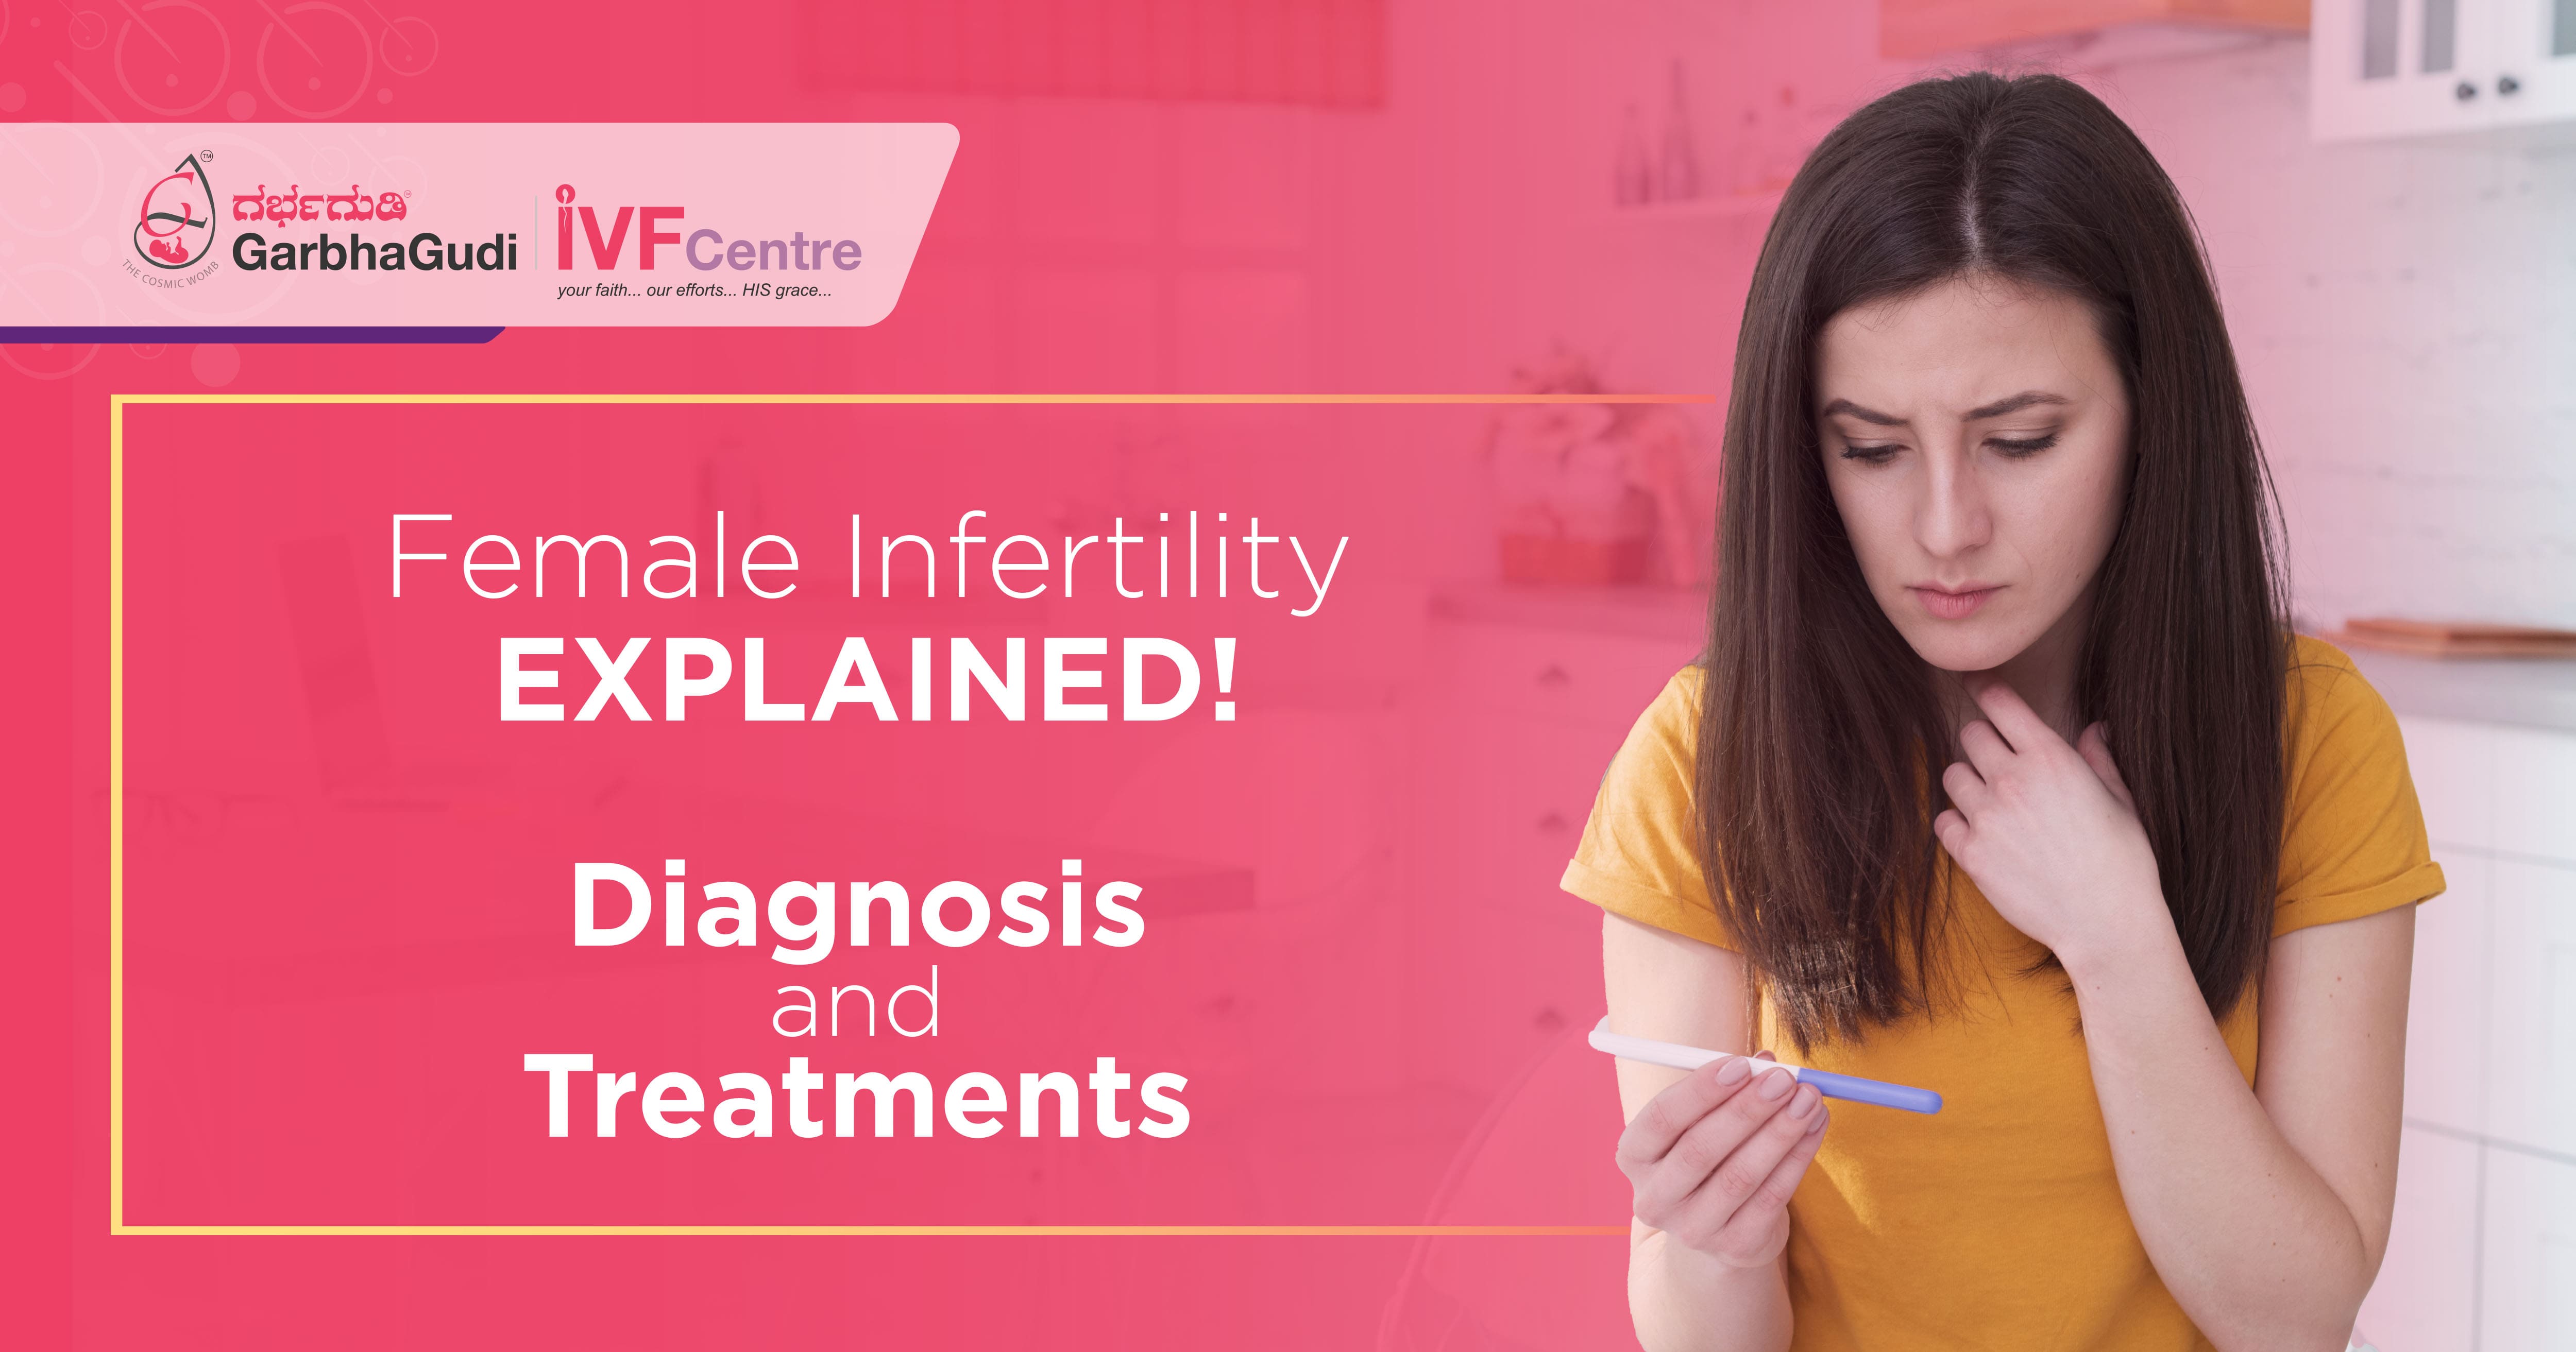 Female Infertility Explained! – Diagnosis and Treatments